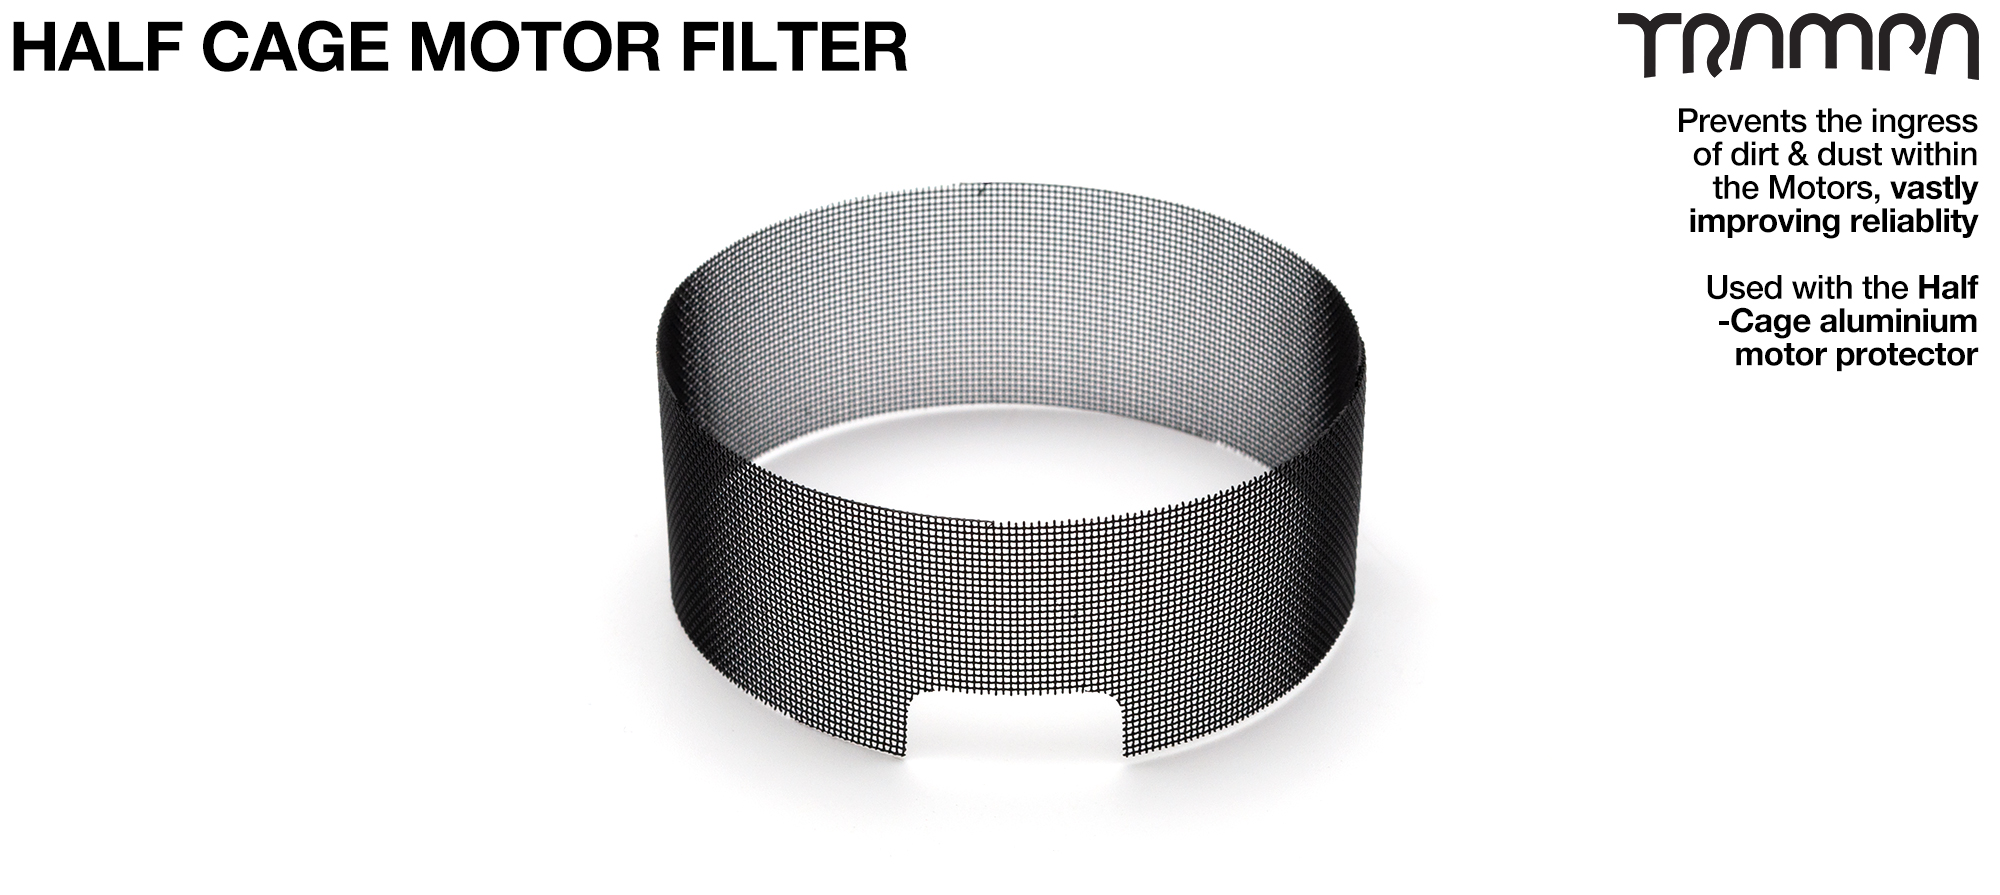 HALF CAGE Stainless Steel Motor protection FILTER - BLACK